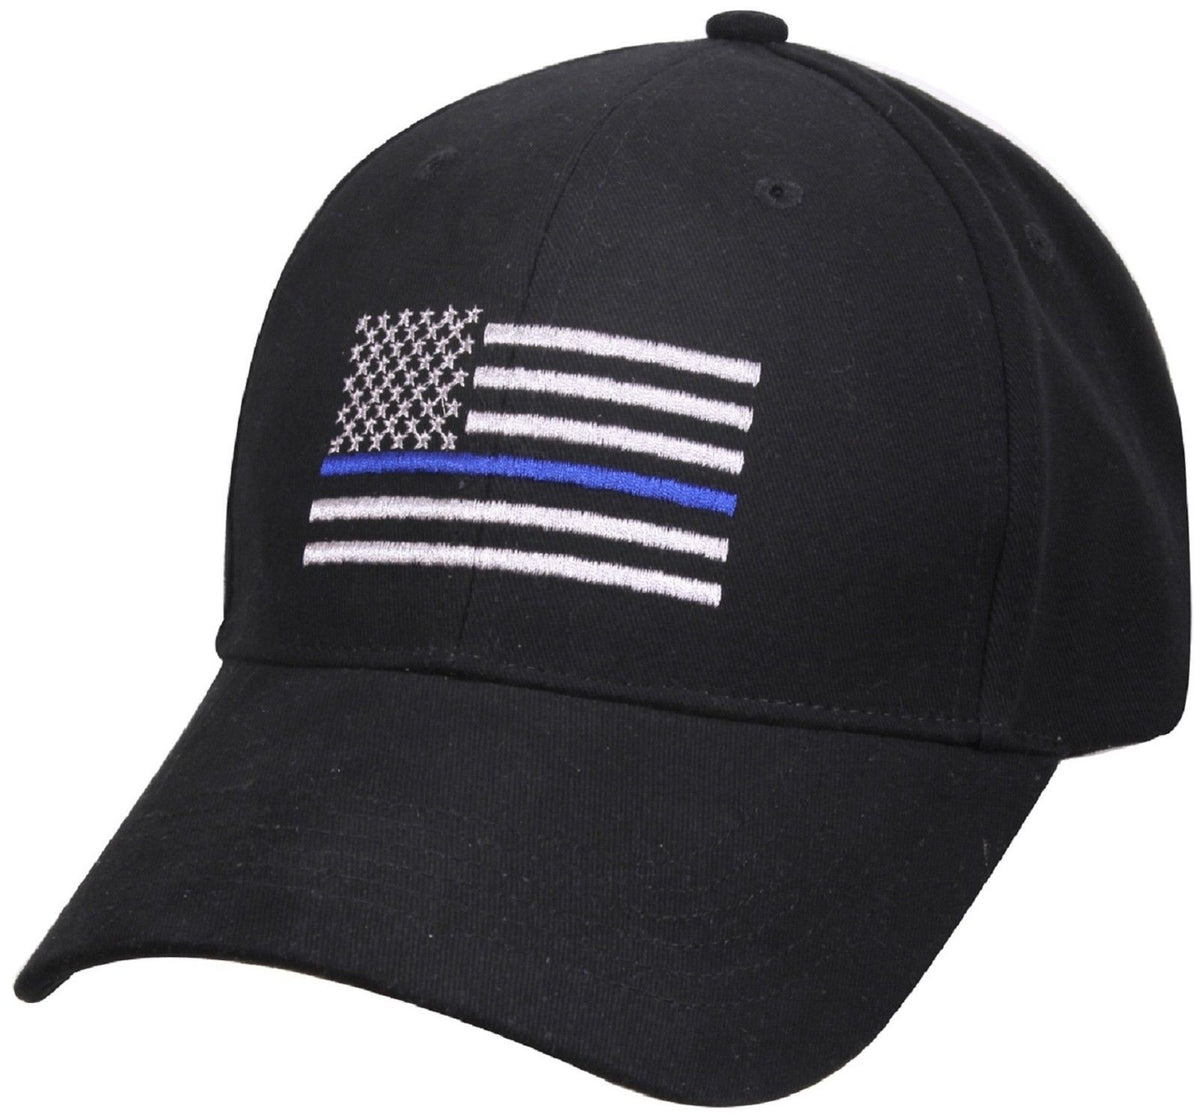  Rothco Officially Licensed NYPD Adjustable Cap : Clothing,  Shoes & Jewelry